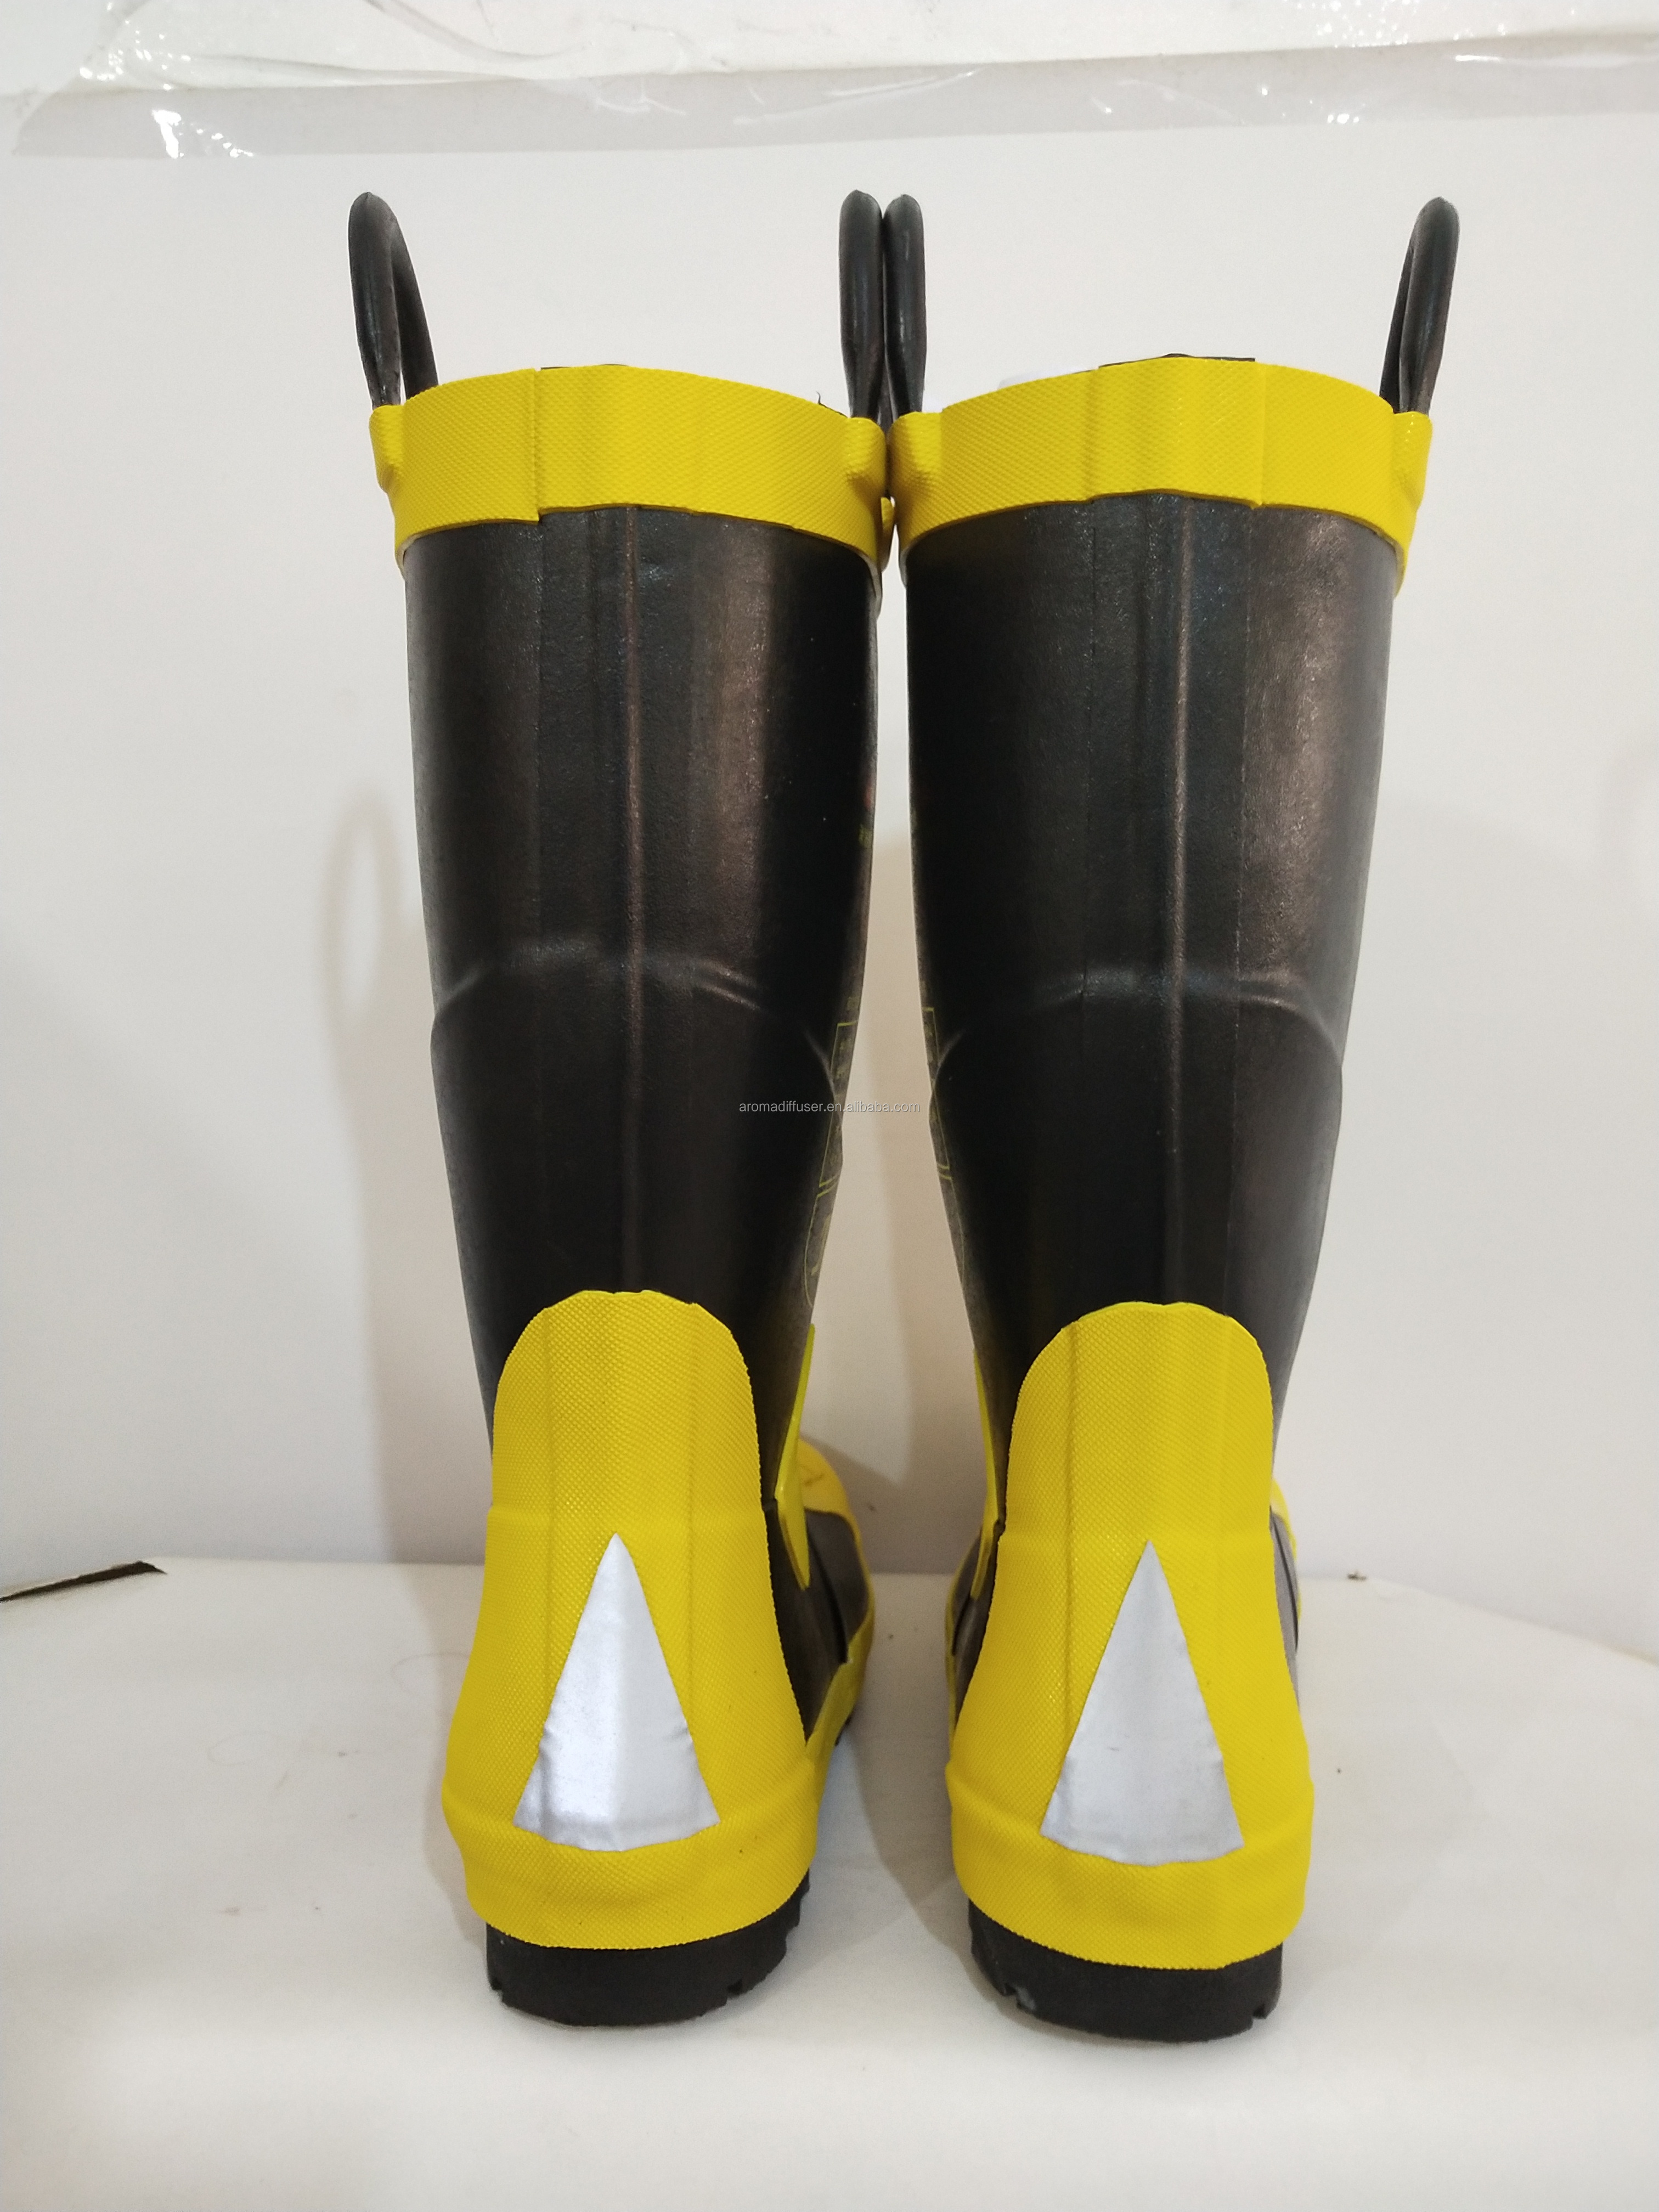 6 layers protective boots